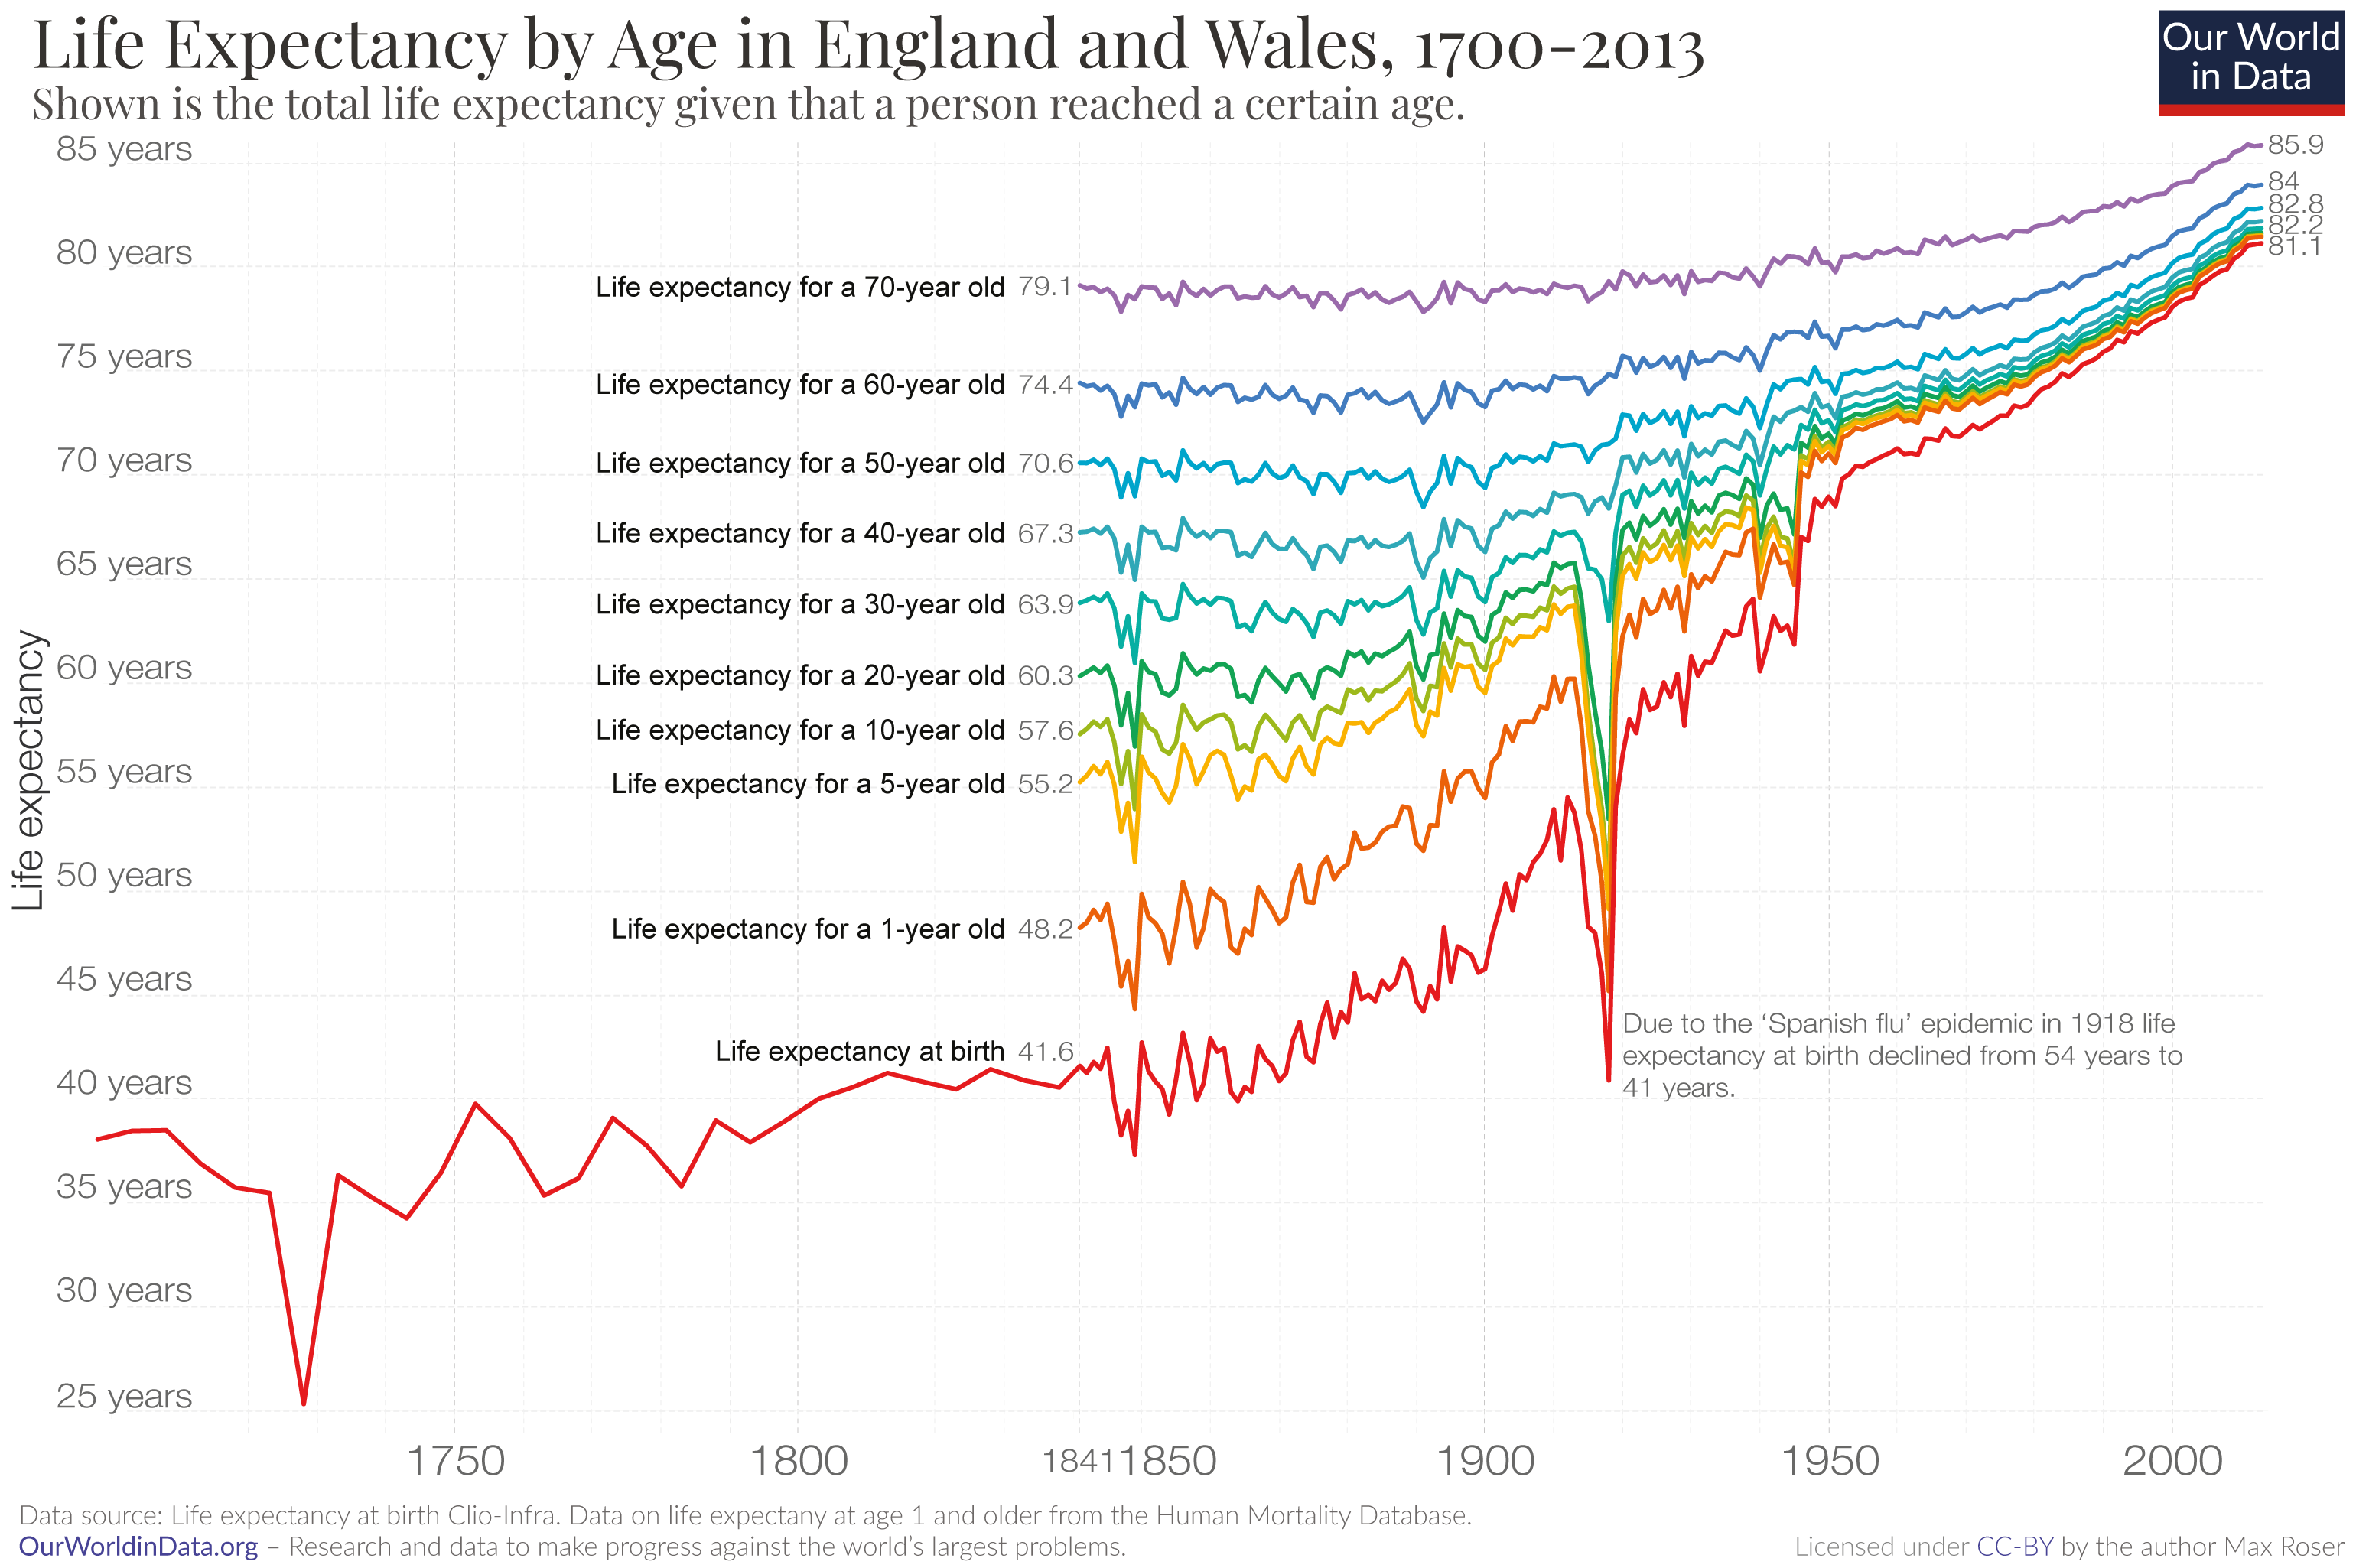 Life expectancy by age in England and Wales, 1700-2013. Chart shows life expectancy increasing at all ages and shows that as we age we are expected to live longer